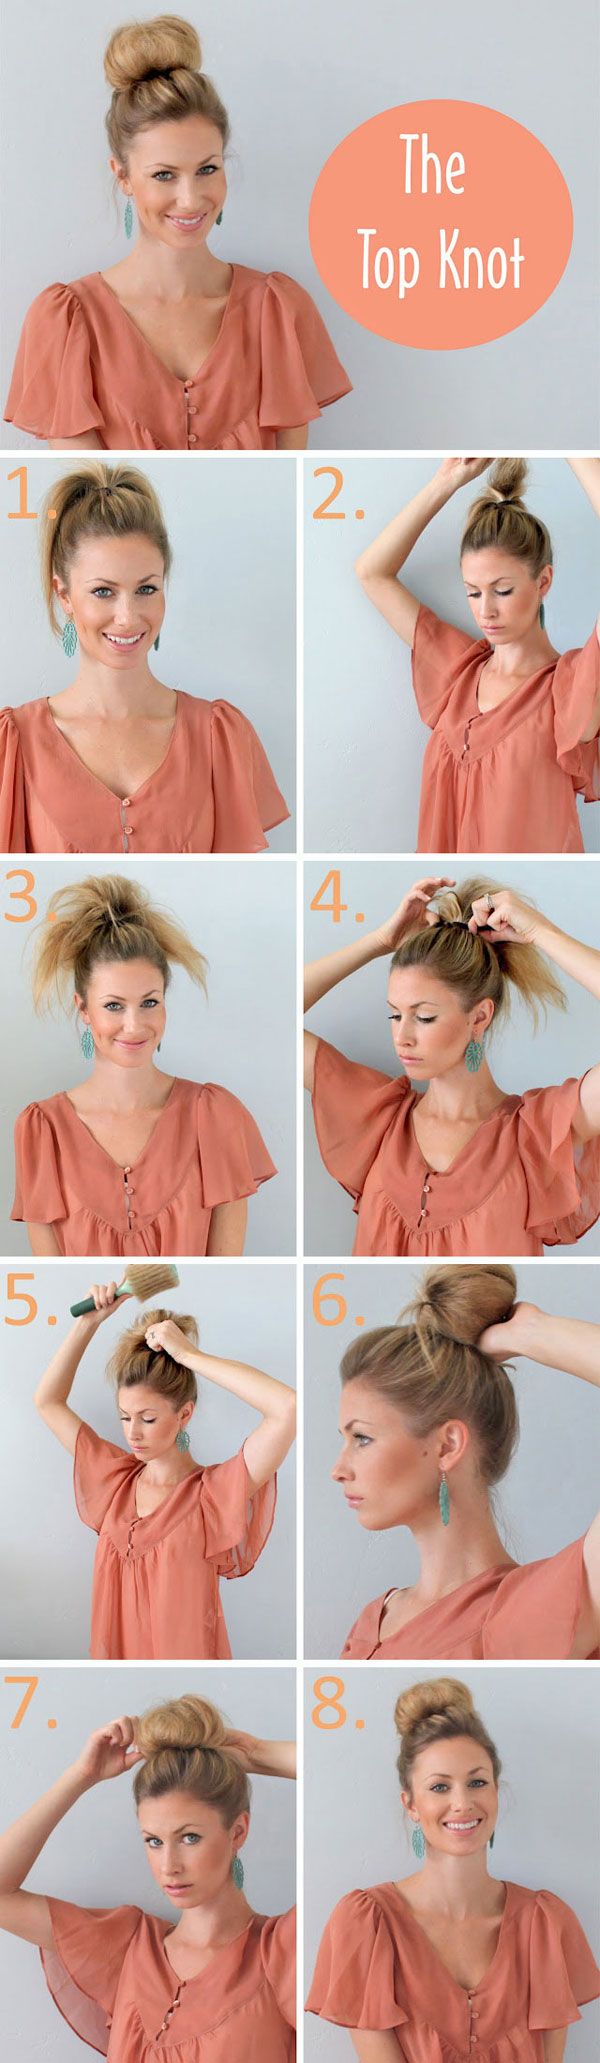 30 Top Knot Bun Wedding Hairstyles That Will Inspire With Tutorial Deer Pearl Flowers